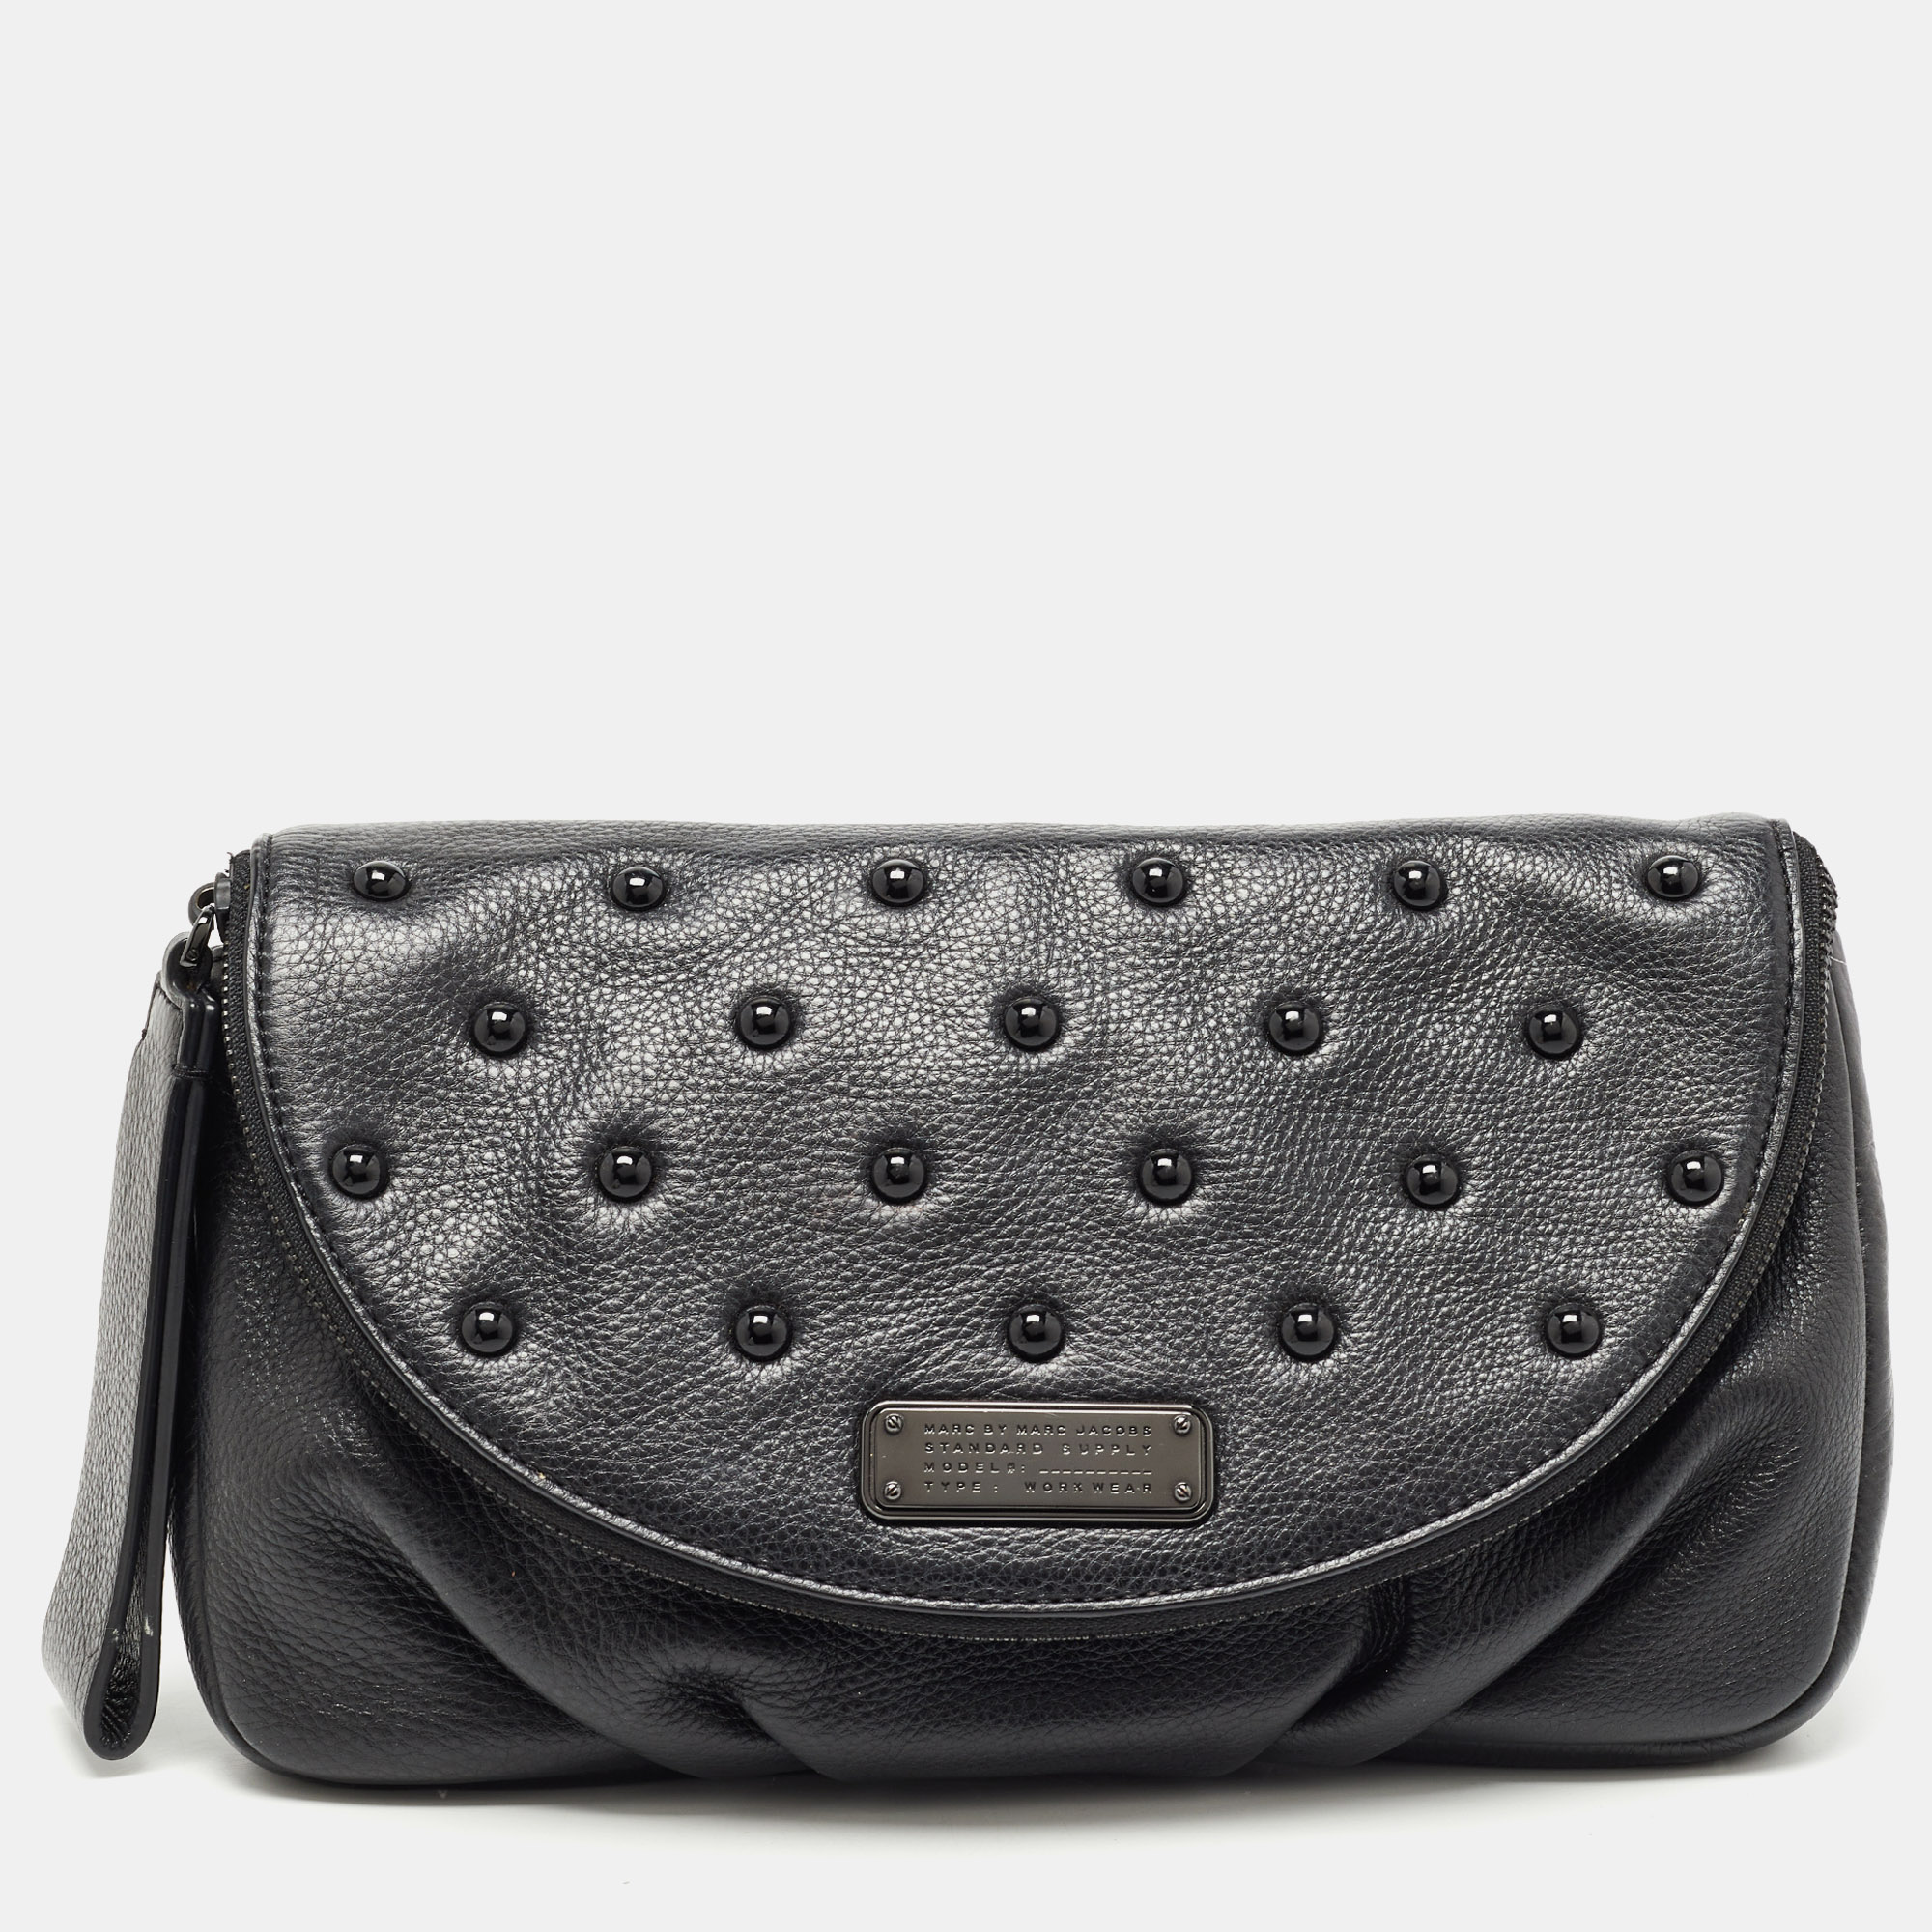 Pre-owned Marc By Marc Jacobs Black Leather Studded Fold Over Clutch